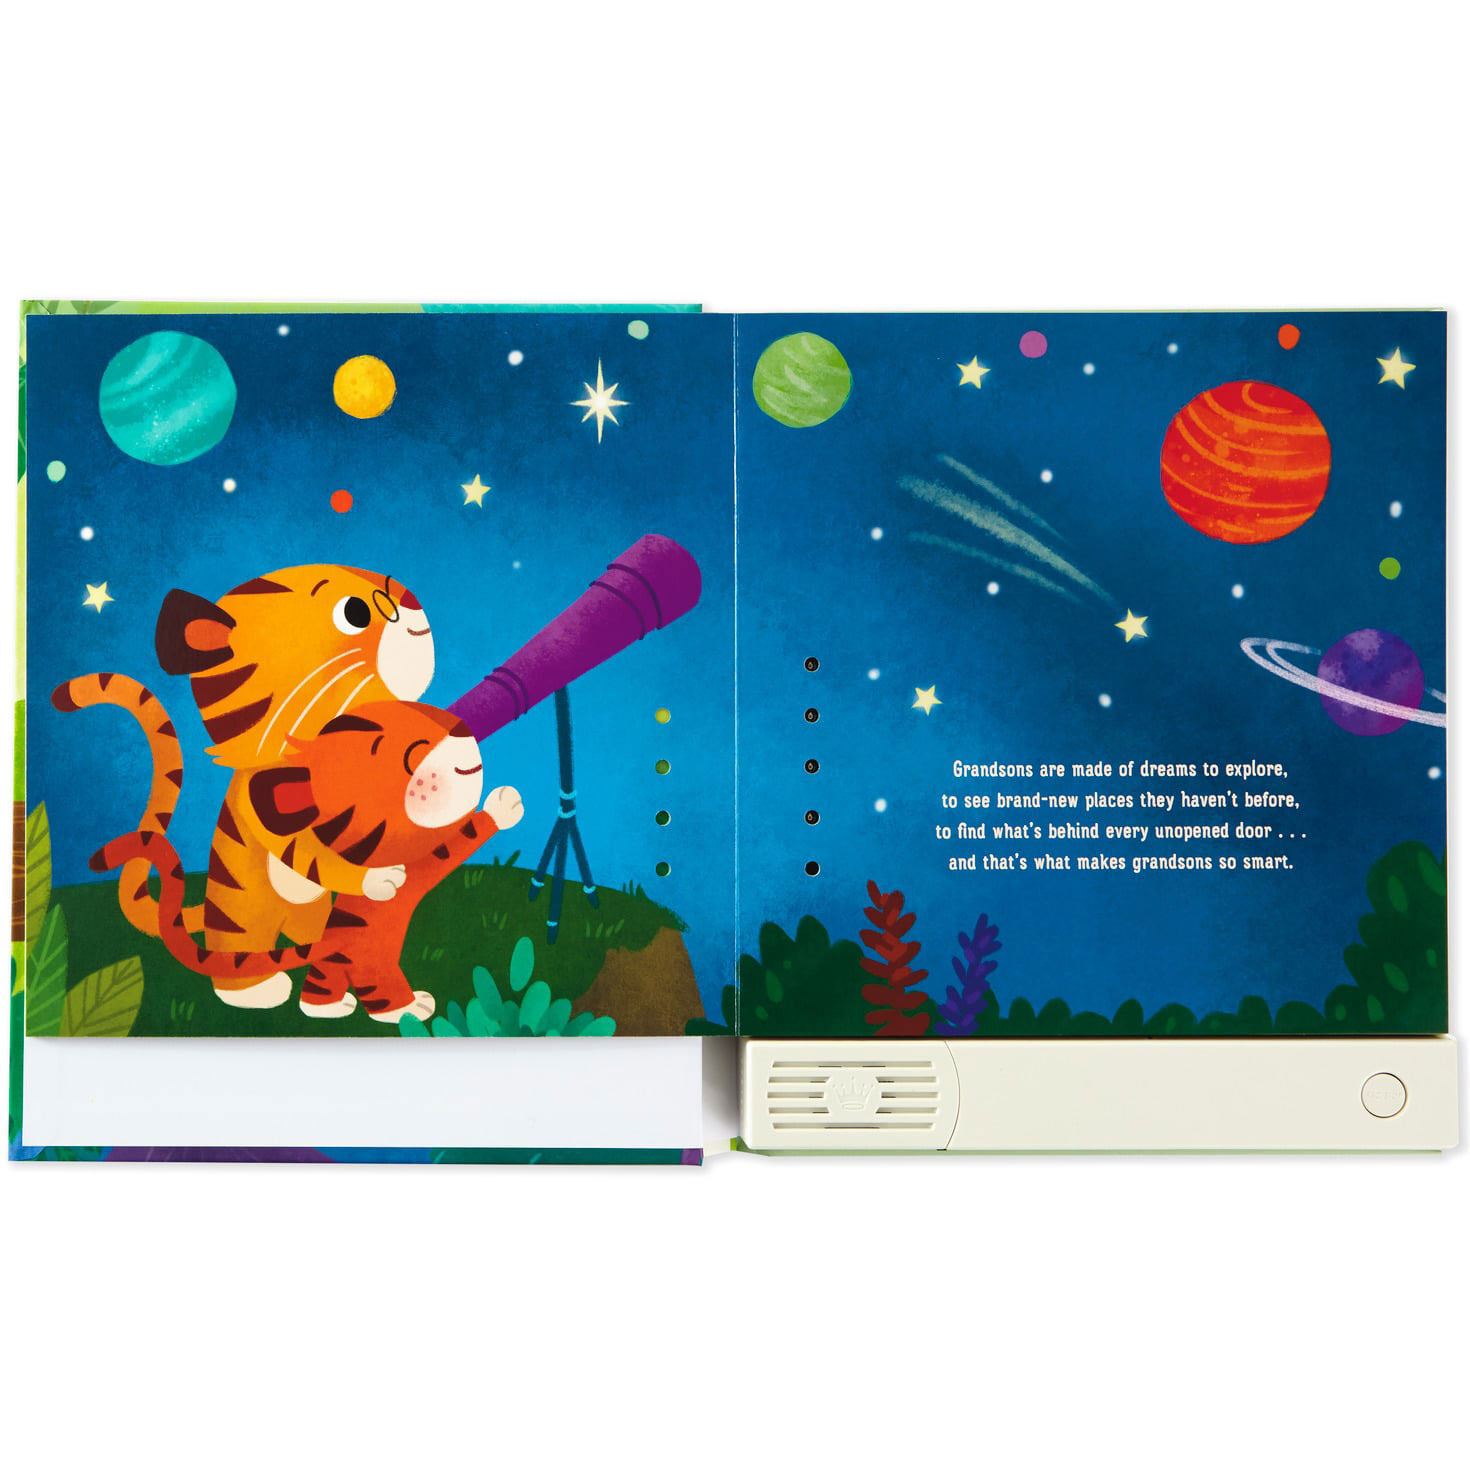 What Are Grandsons Made Of? Recordable Storybook for only USD 34.99 | Hallmark